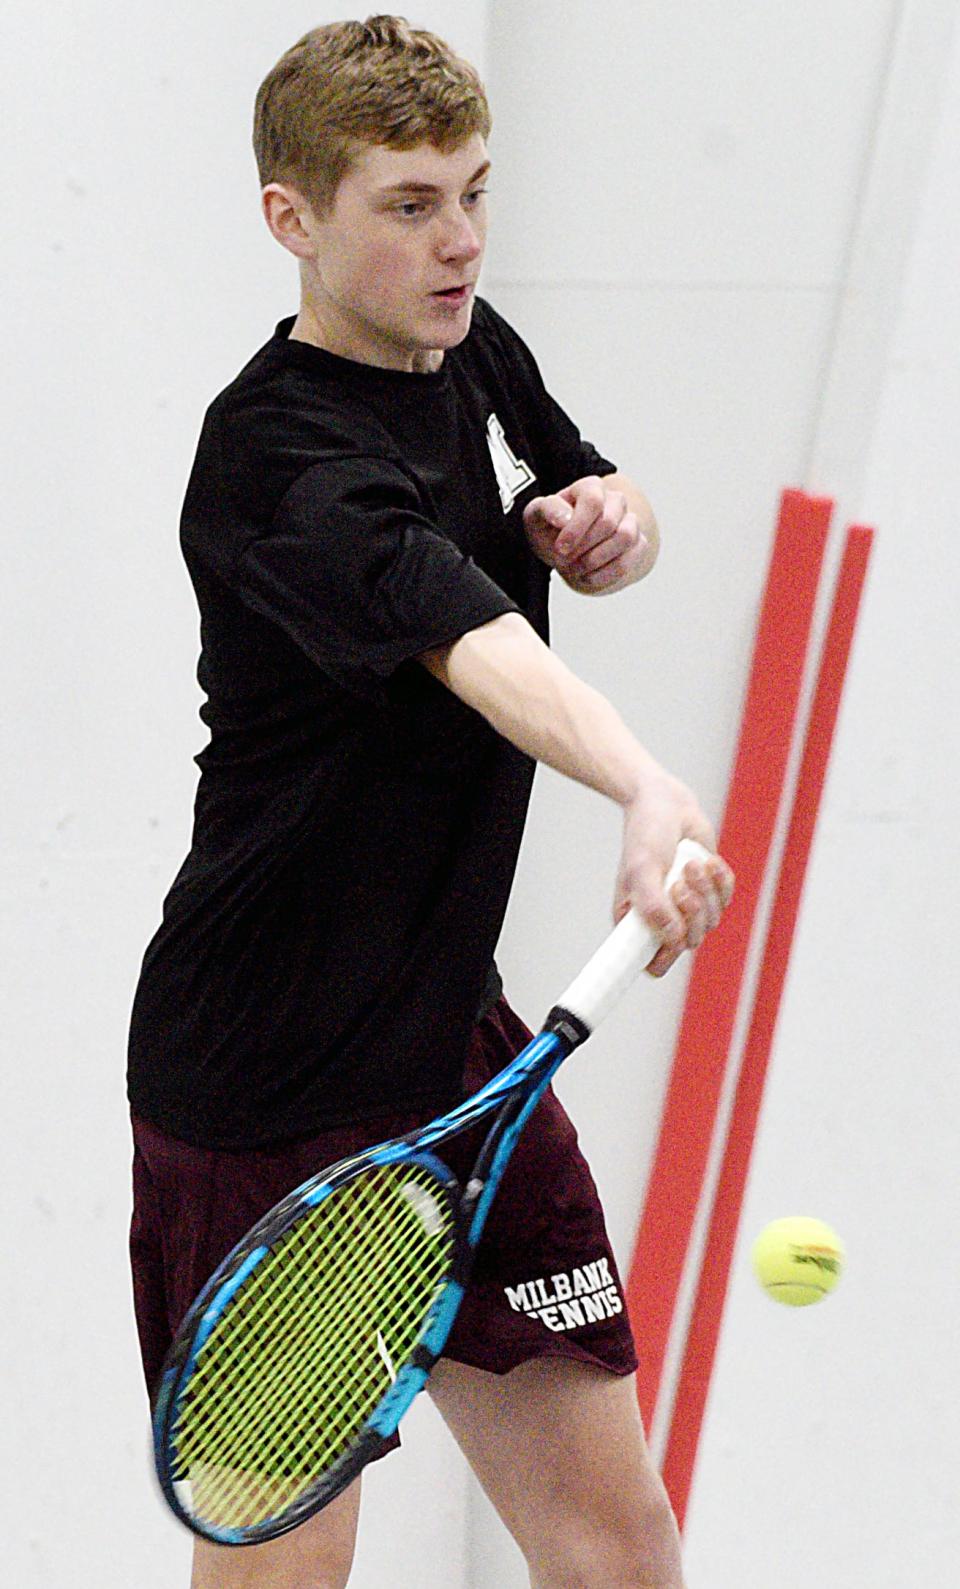 Milbank's Joe Schulte hits a return shot during flight one doubles action against Yankton during a high school boys tennis triangular on Thursday, April 6, 2023, at the NFAA Easton Center in Yankton.